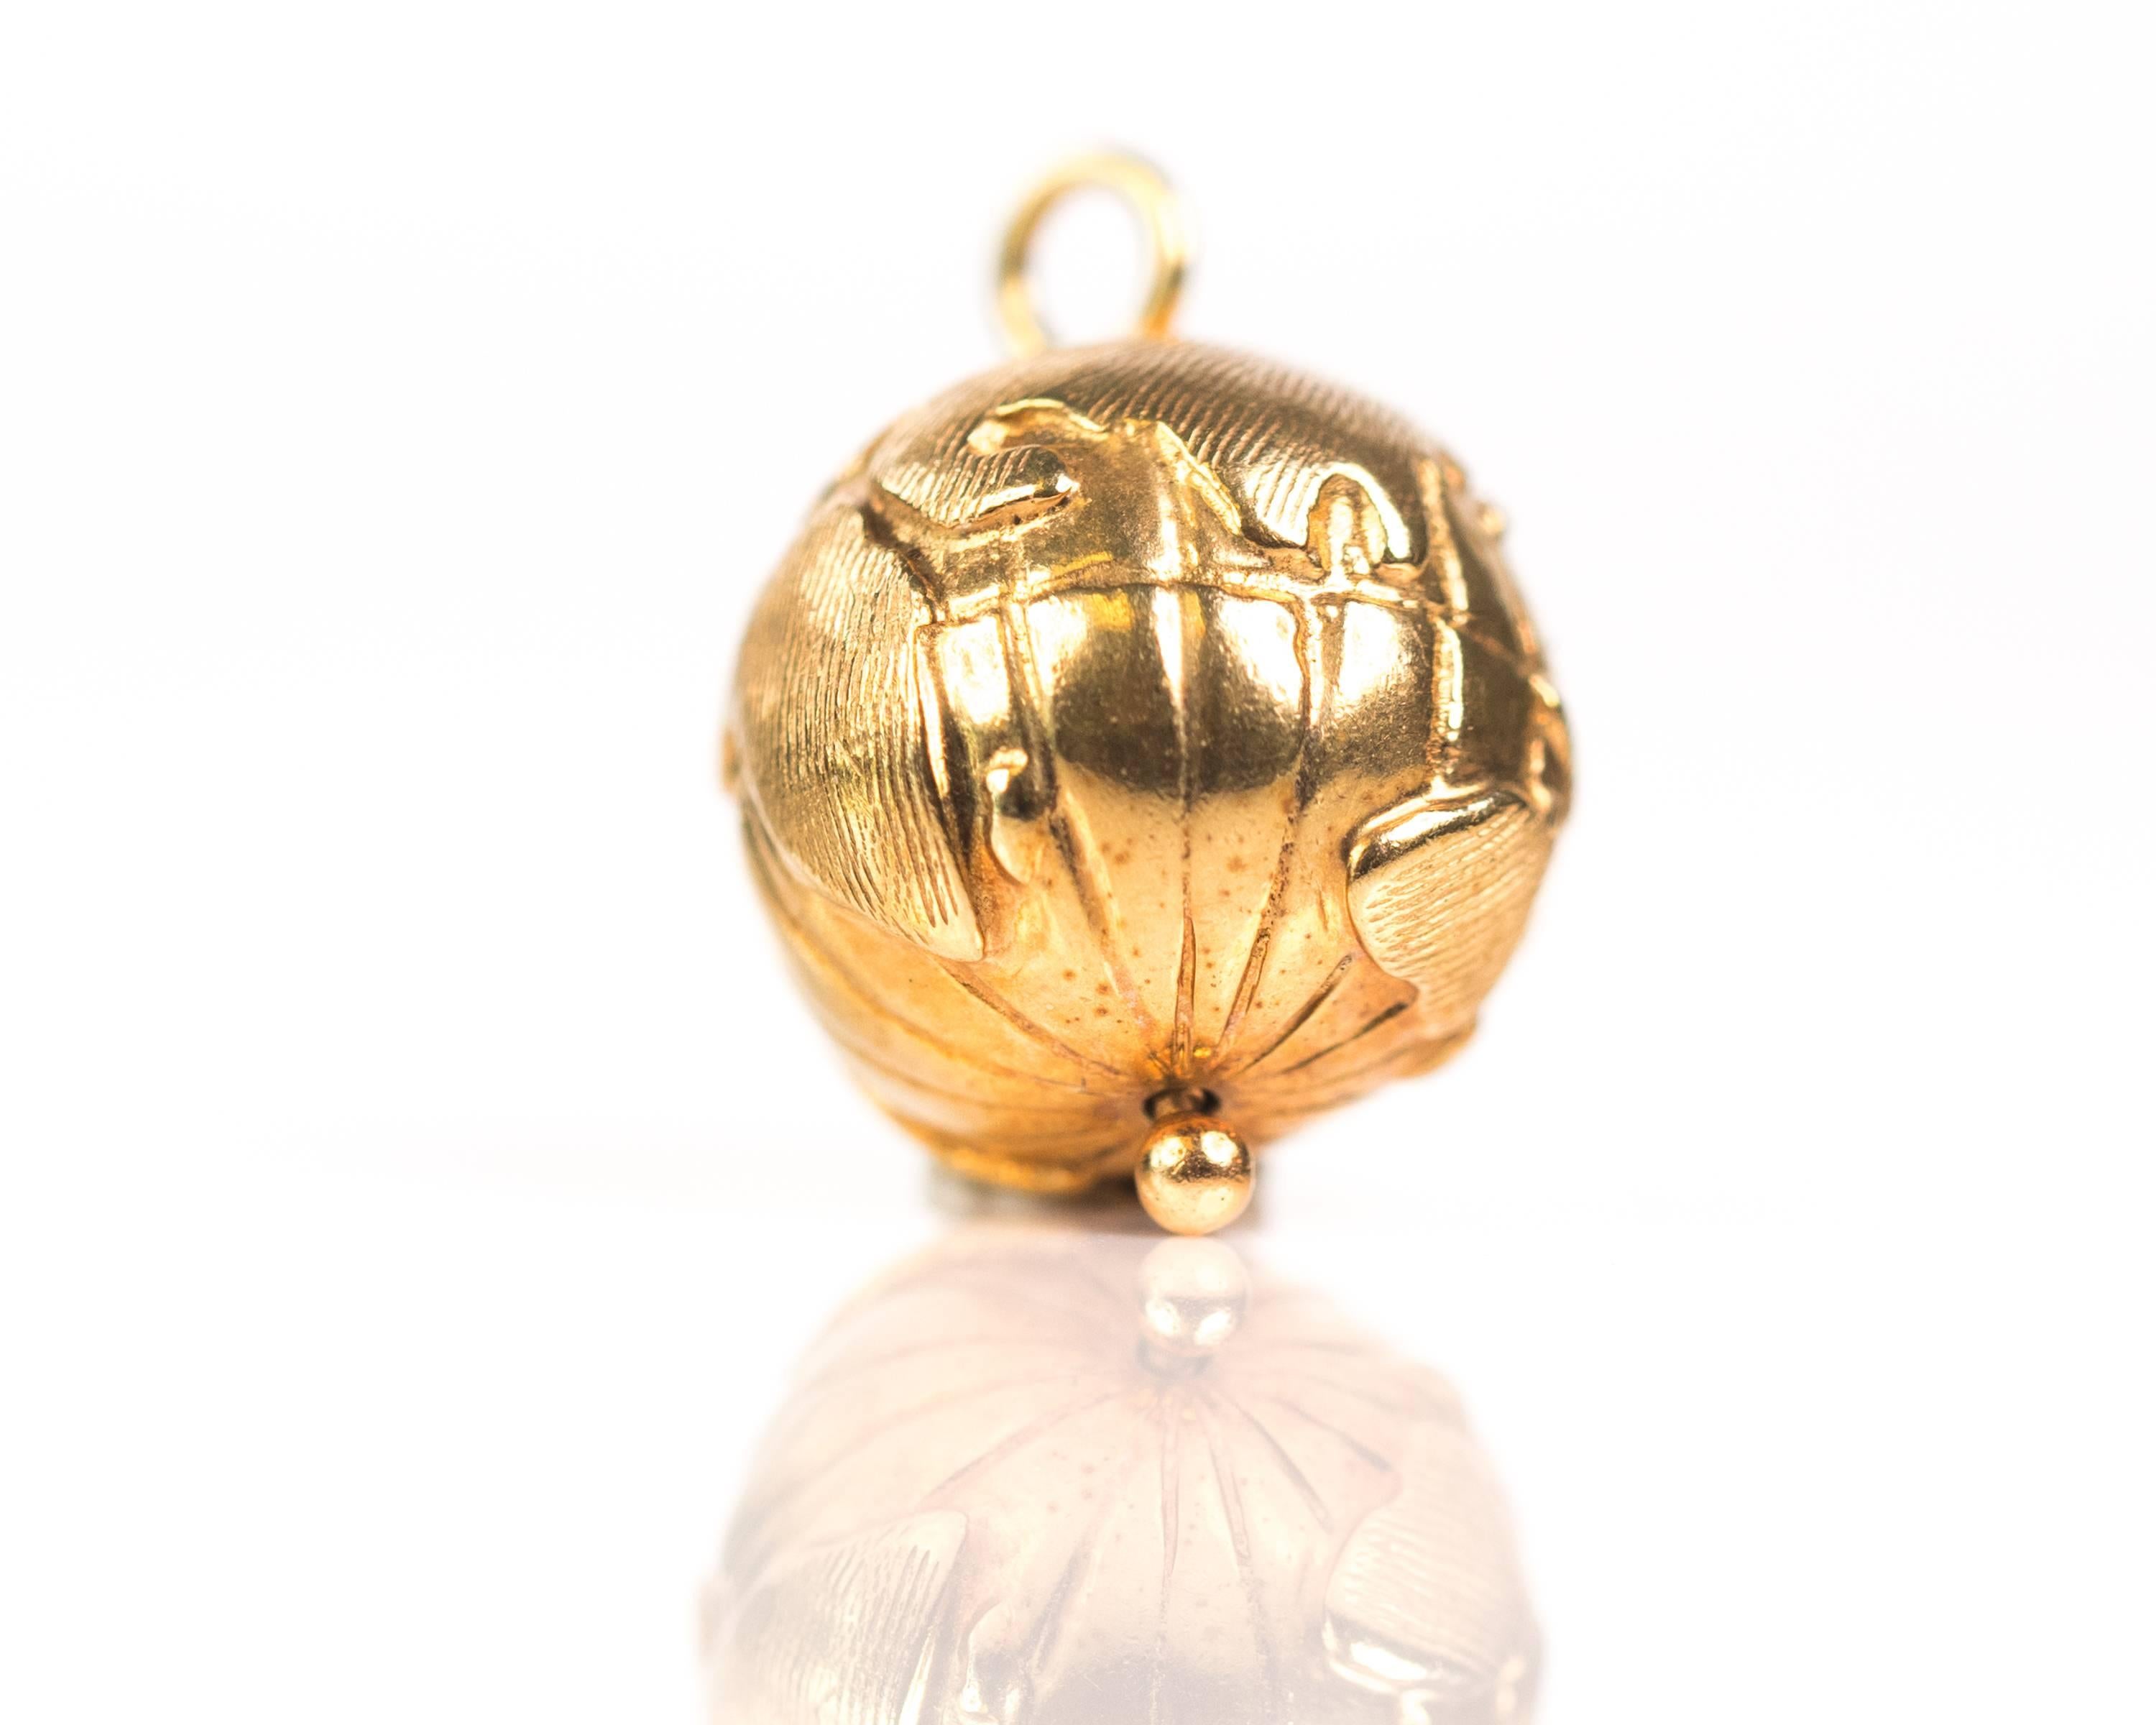 1970s Spinning Globe Charm - 14 Karat Yellow Gold

This 14 Karat Yellow Gold Globe spins on it's axis and features the continents and longitude lines. The bail pin runs through the center of the globe providing an axis on which the orb spins.